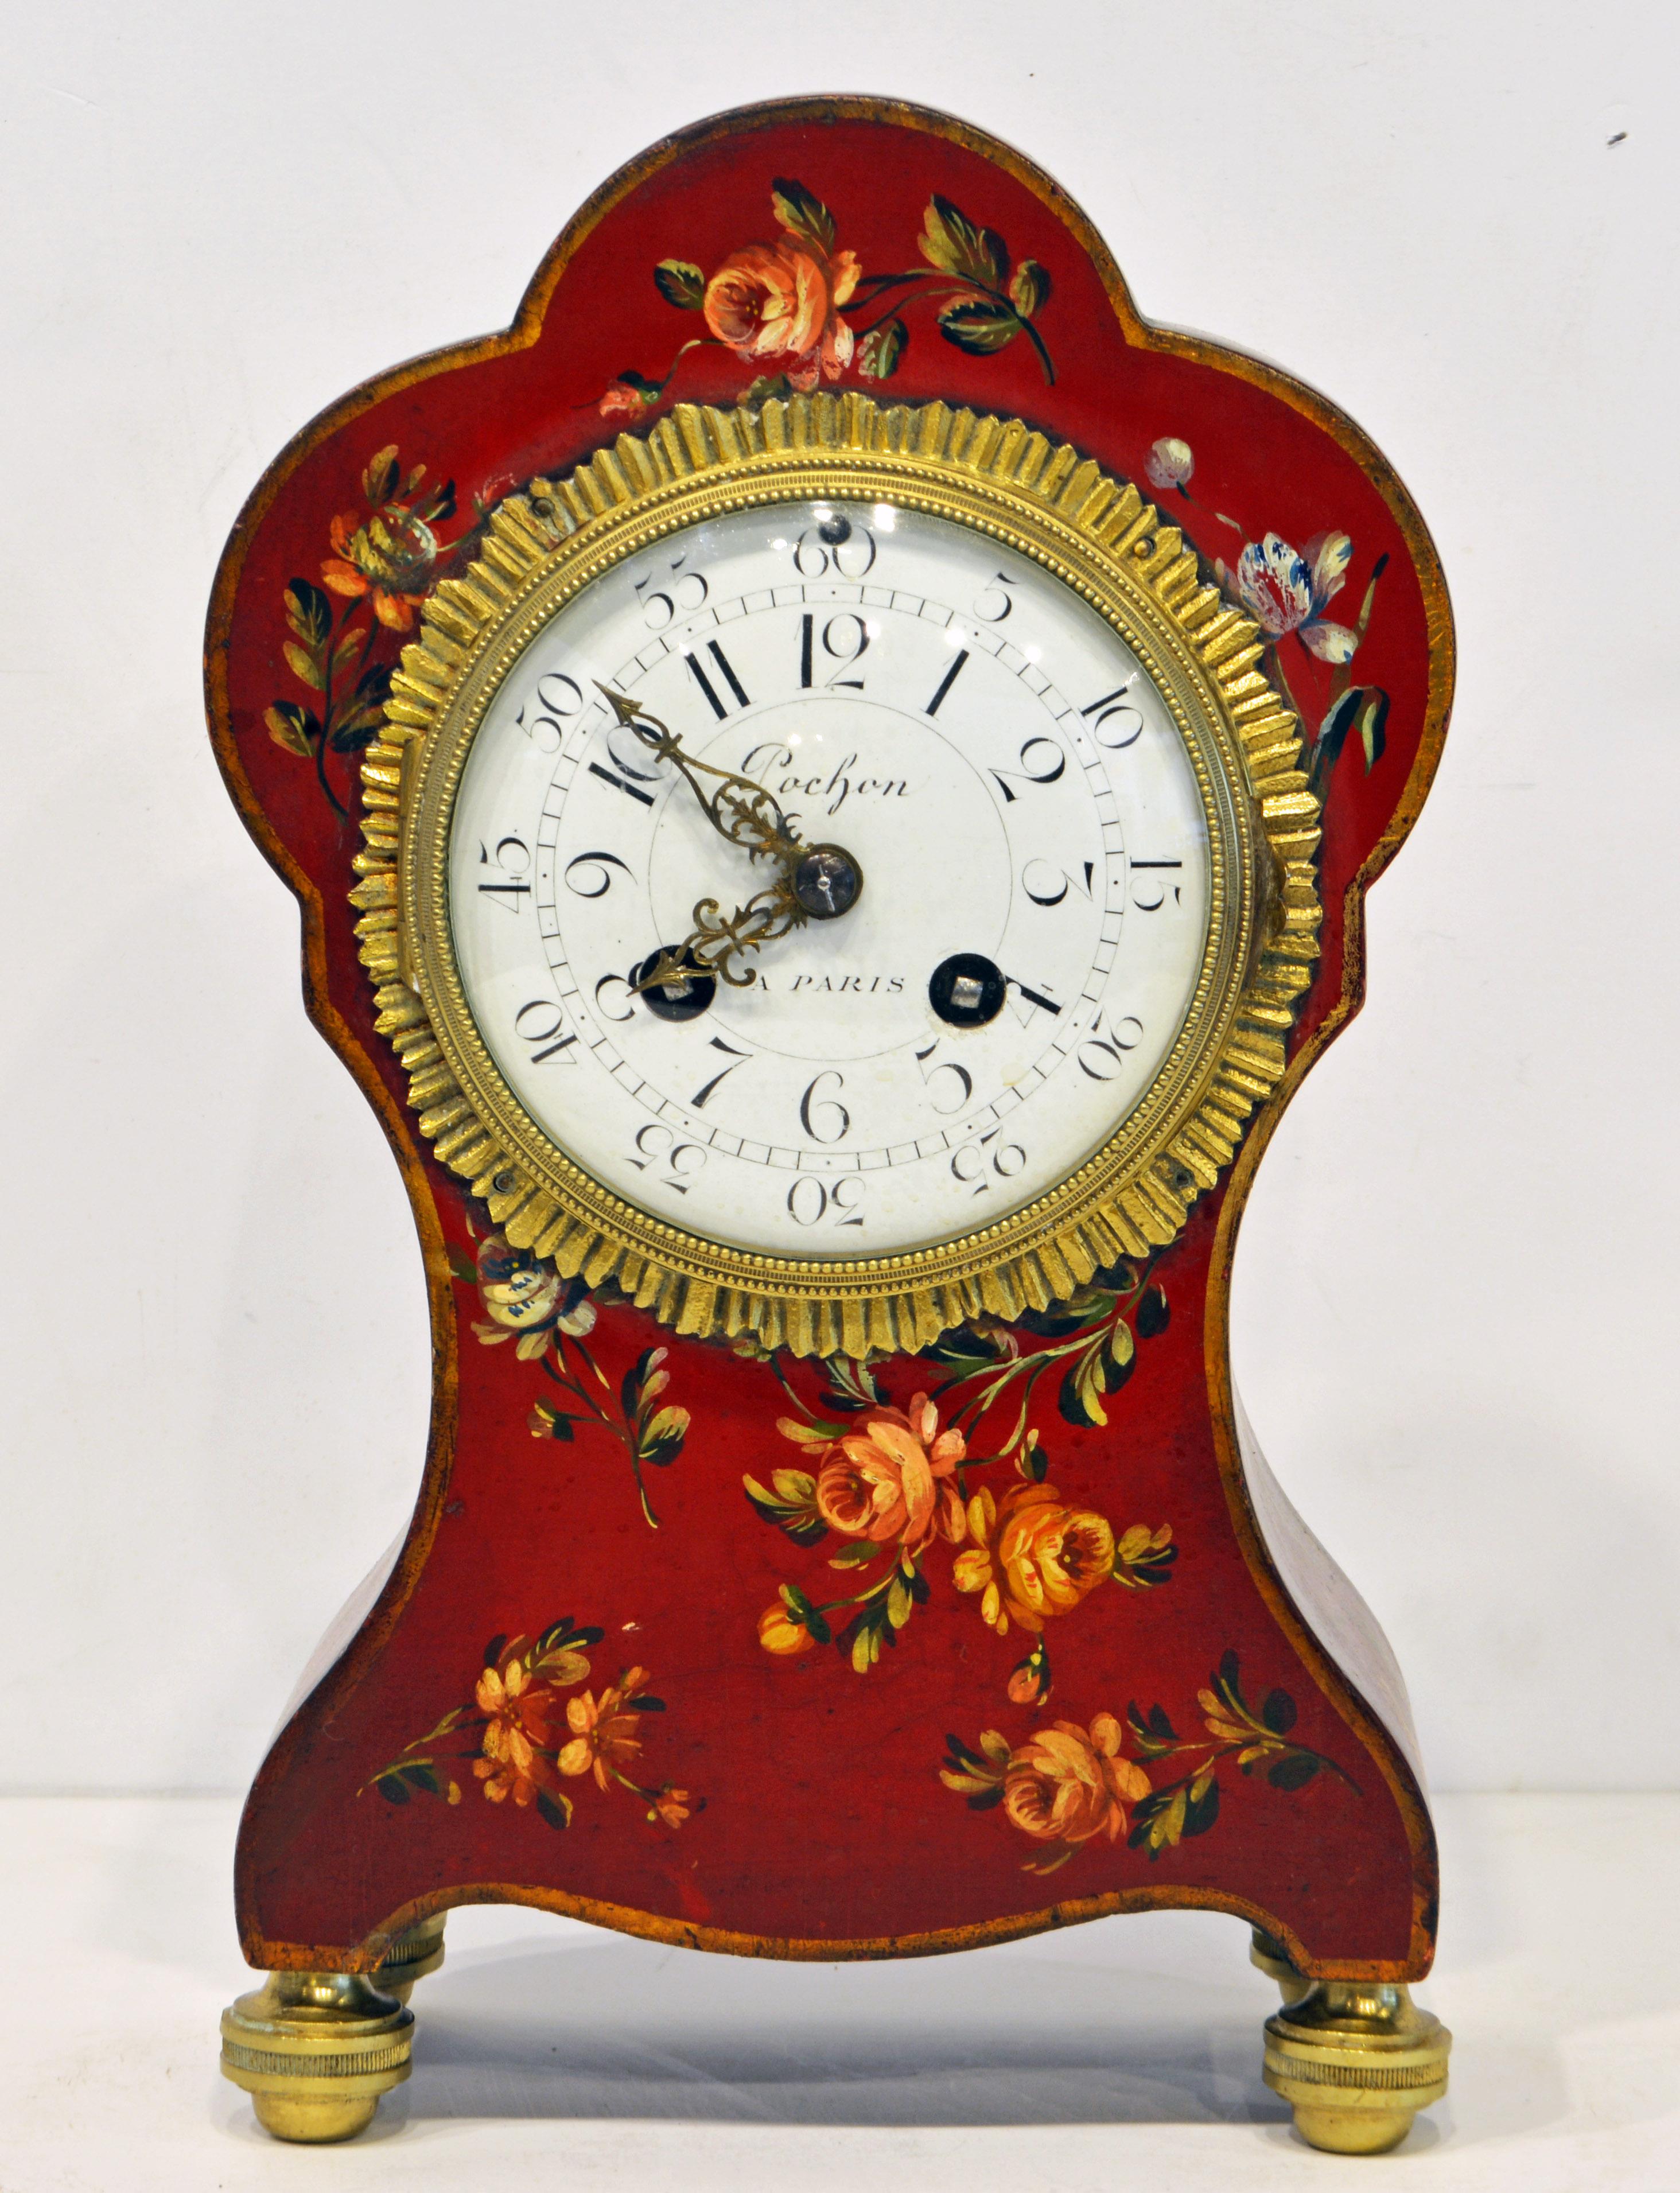 Standing on four sphere shape gilt bronze feet his adorable French Louis Philippe mantel clock features a beautiful shape with soft curves painted in a Venetian red and decorated with flowers and leaf work of great detail. The enamel dial is